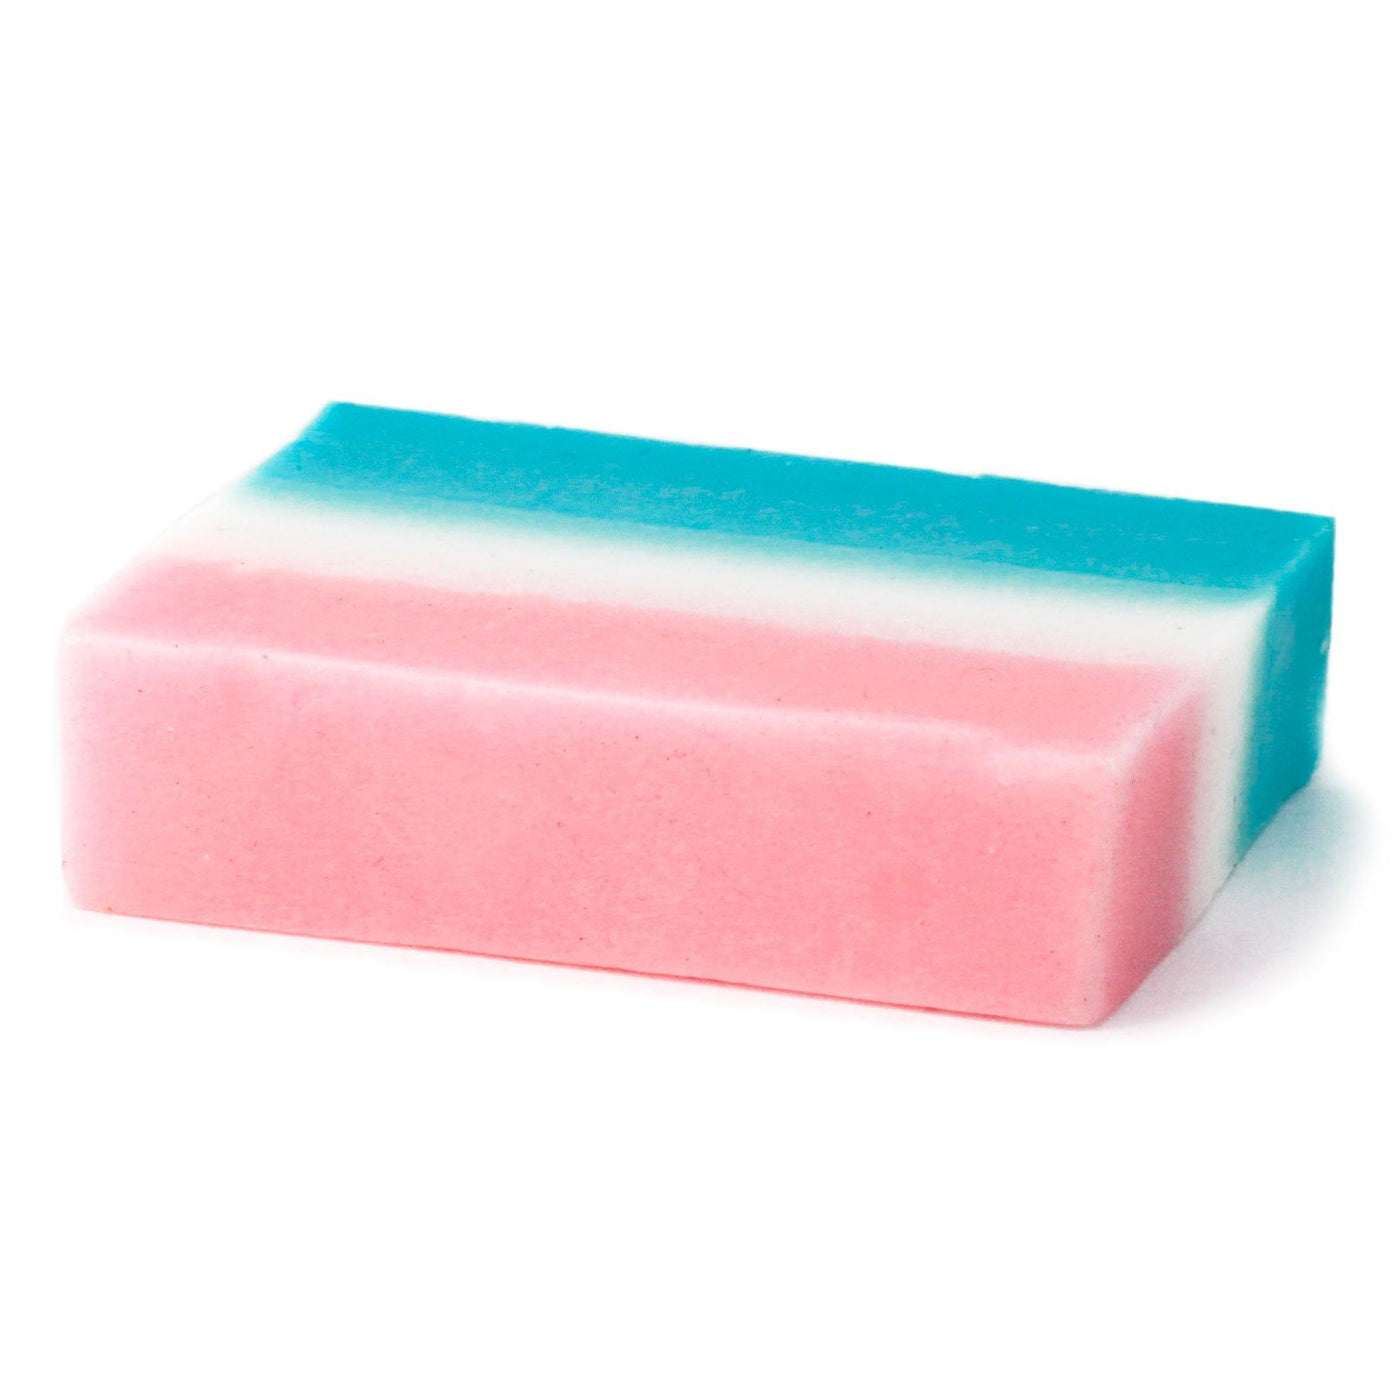 Pink-Blue Baby Powder Hand Made Fragranced Soap Loaf And Slices.